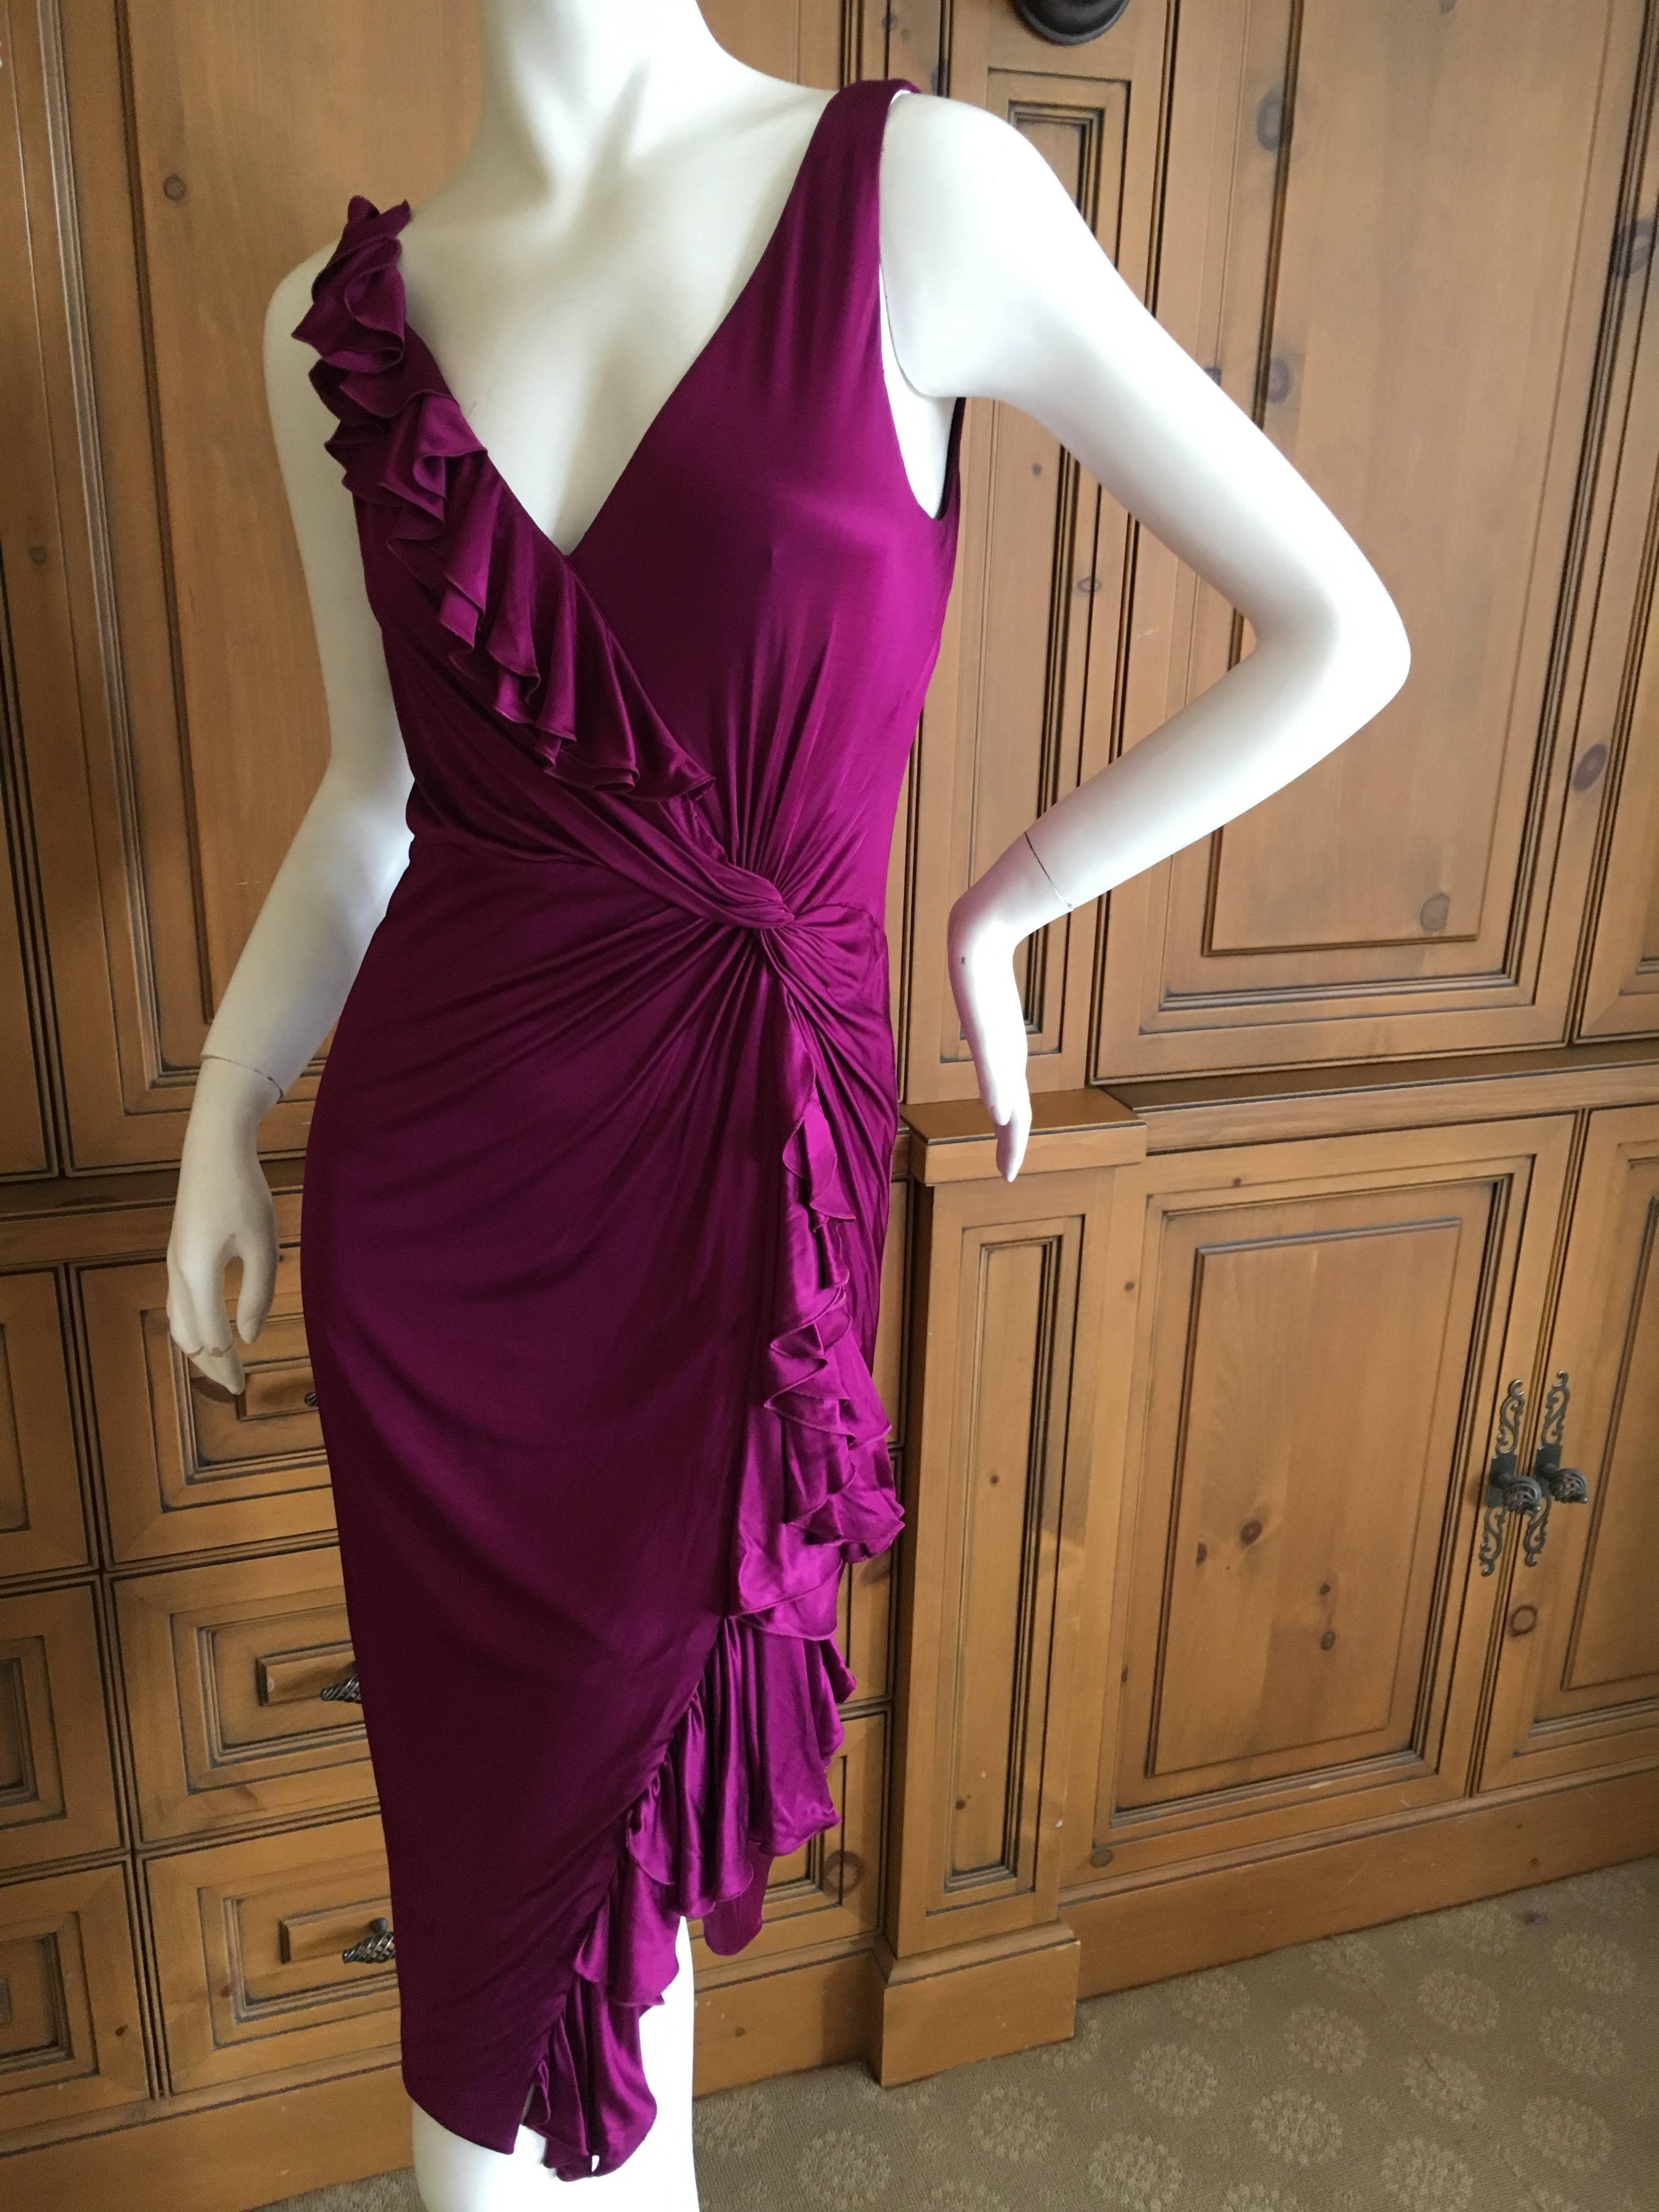 Luscious purple jersey dress with ruffle trim from Versace.
Size 42
Bust 38